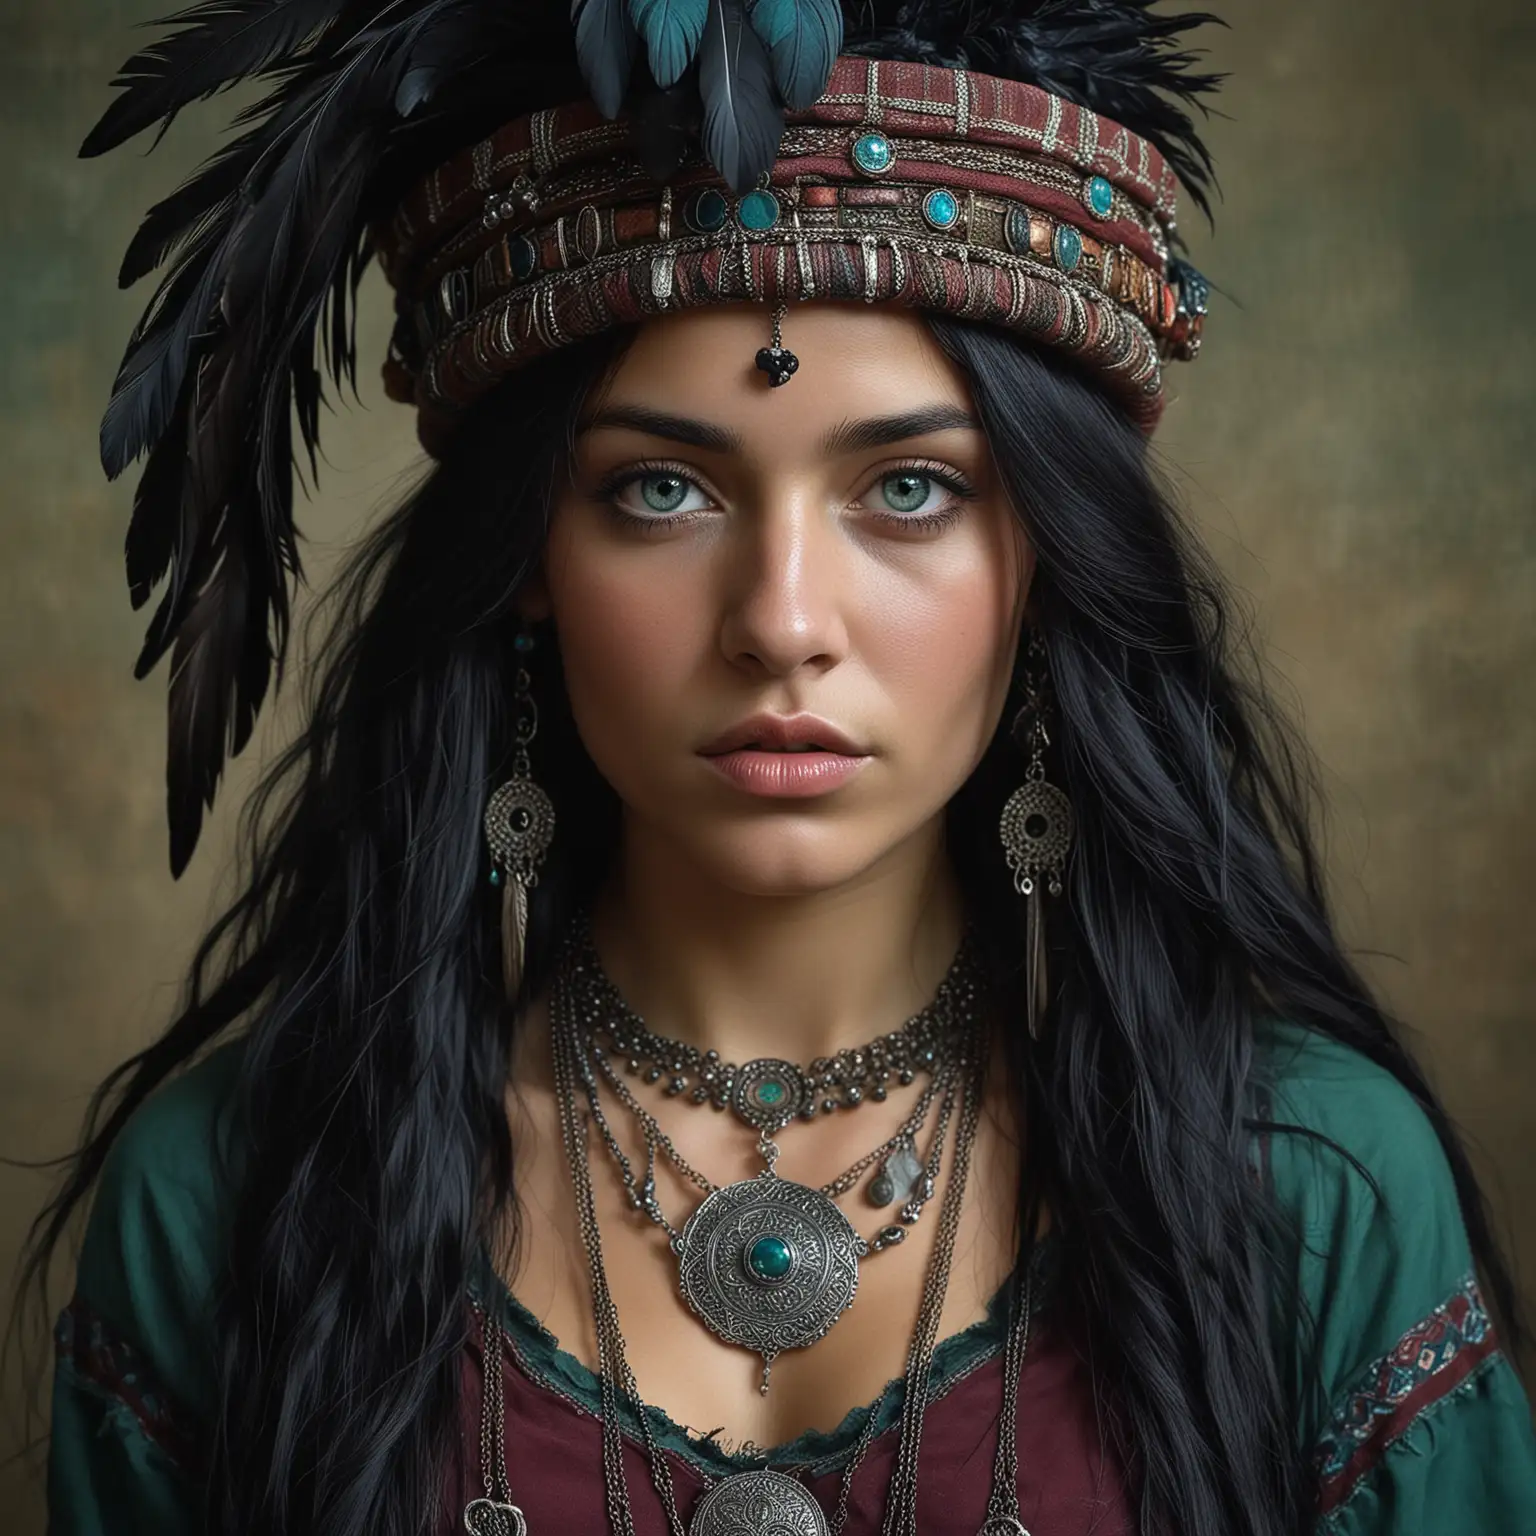 Hyperrealistic Portrait of Romani Girl Eldra Roberts with Black Crow Feathers Hat and Celtic Necklaces